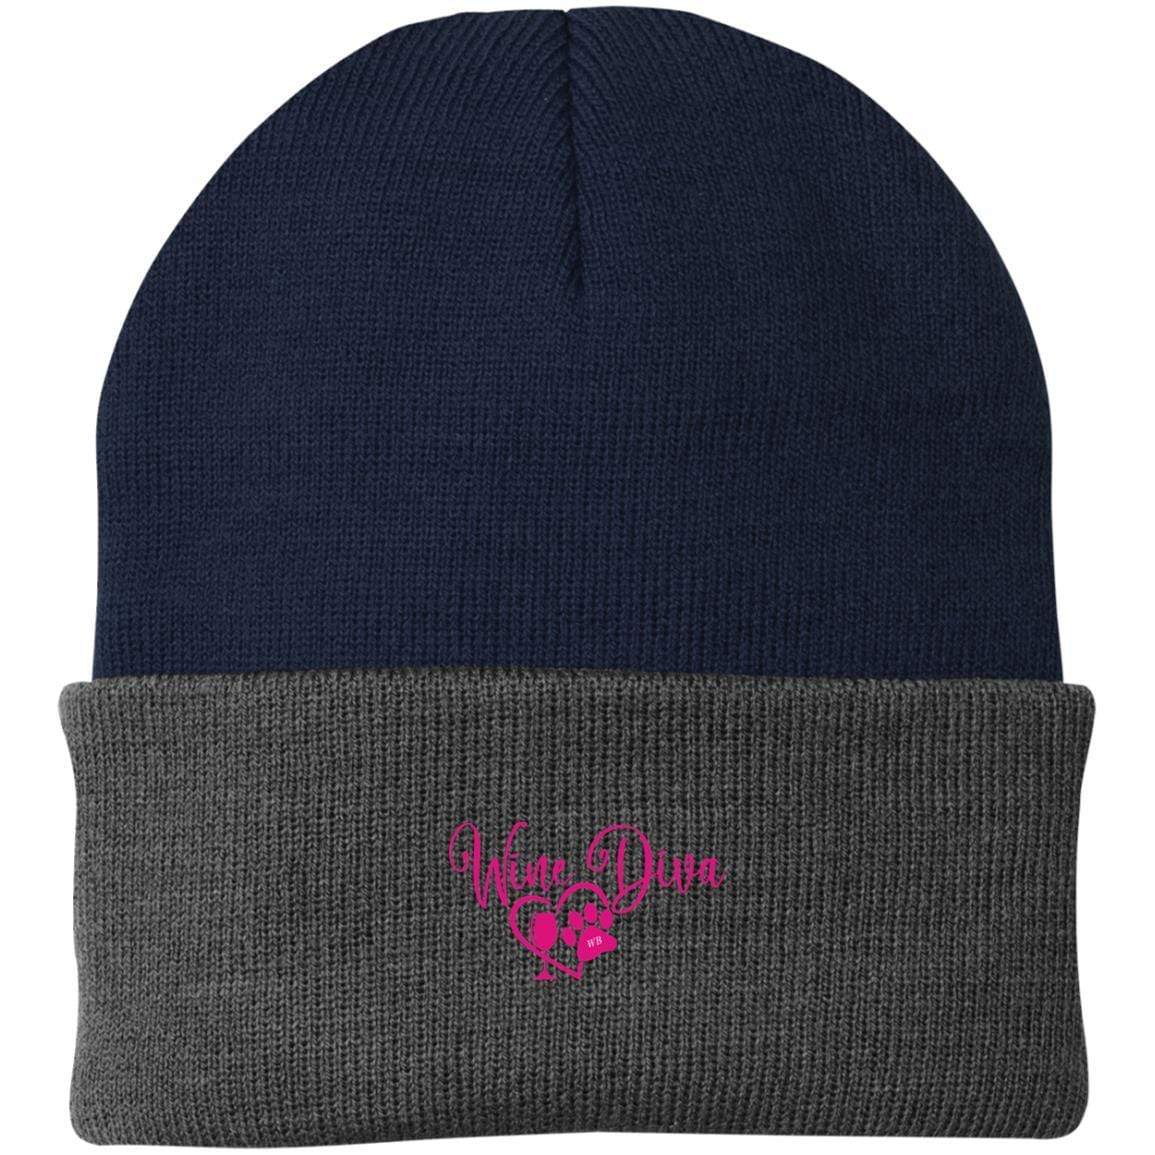 Hats Navy/Athletic Oxford / One Size Winey Bitches Co "Wine Diva" Embroidered Knit Cap WineyBitchesCo